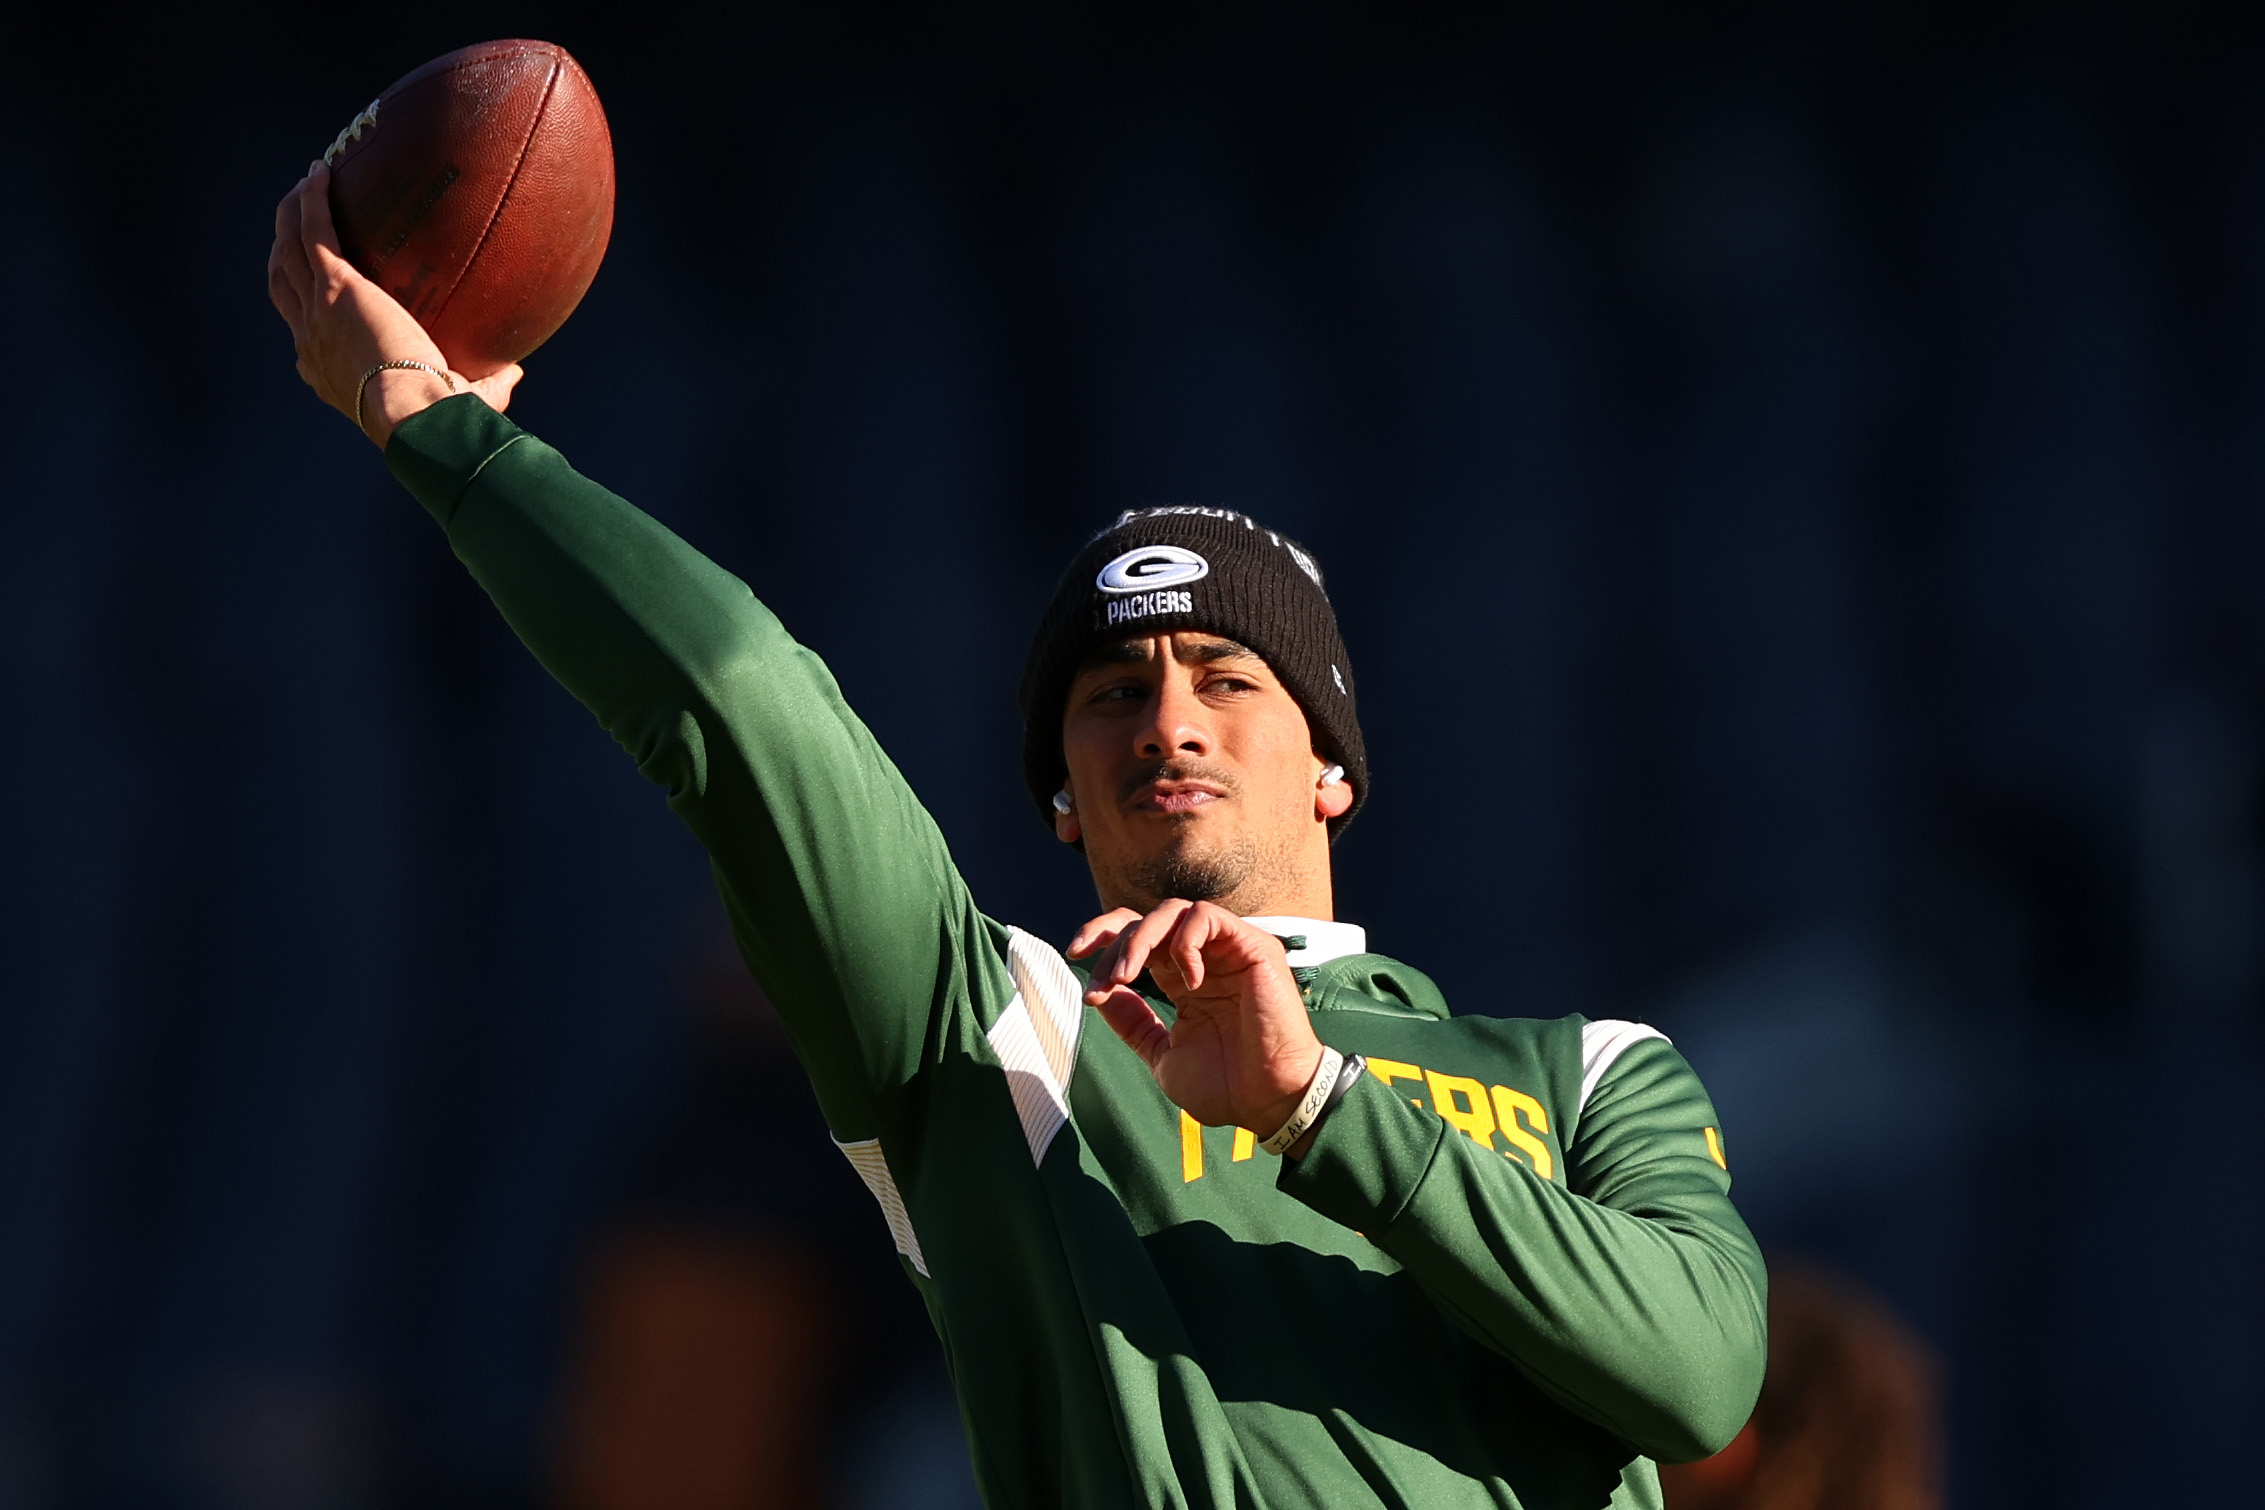 Jordan Love of the Green Bay Packers warms up prior to the game against the Chicago Bears.